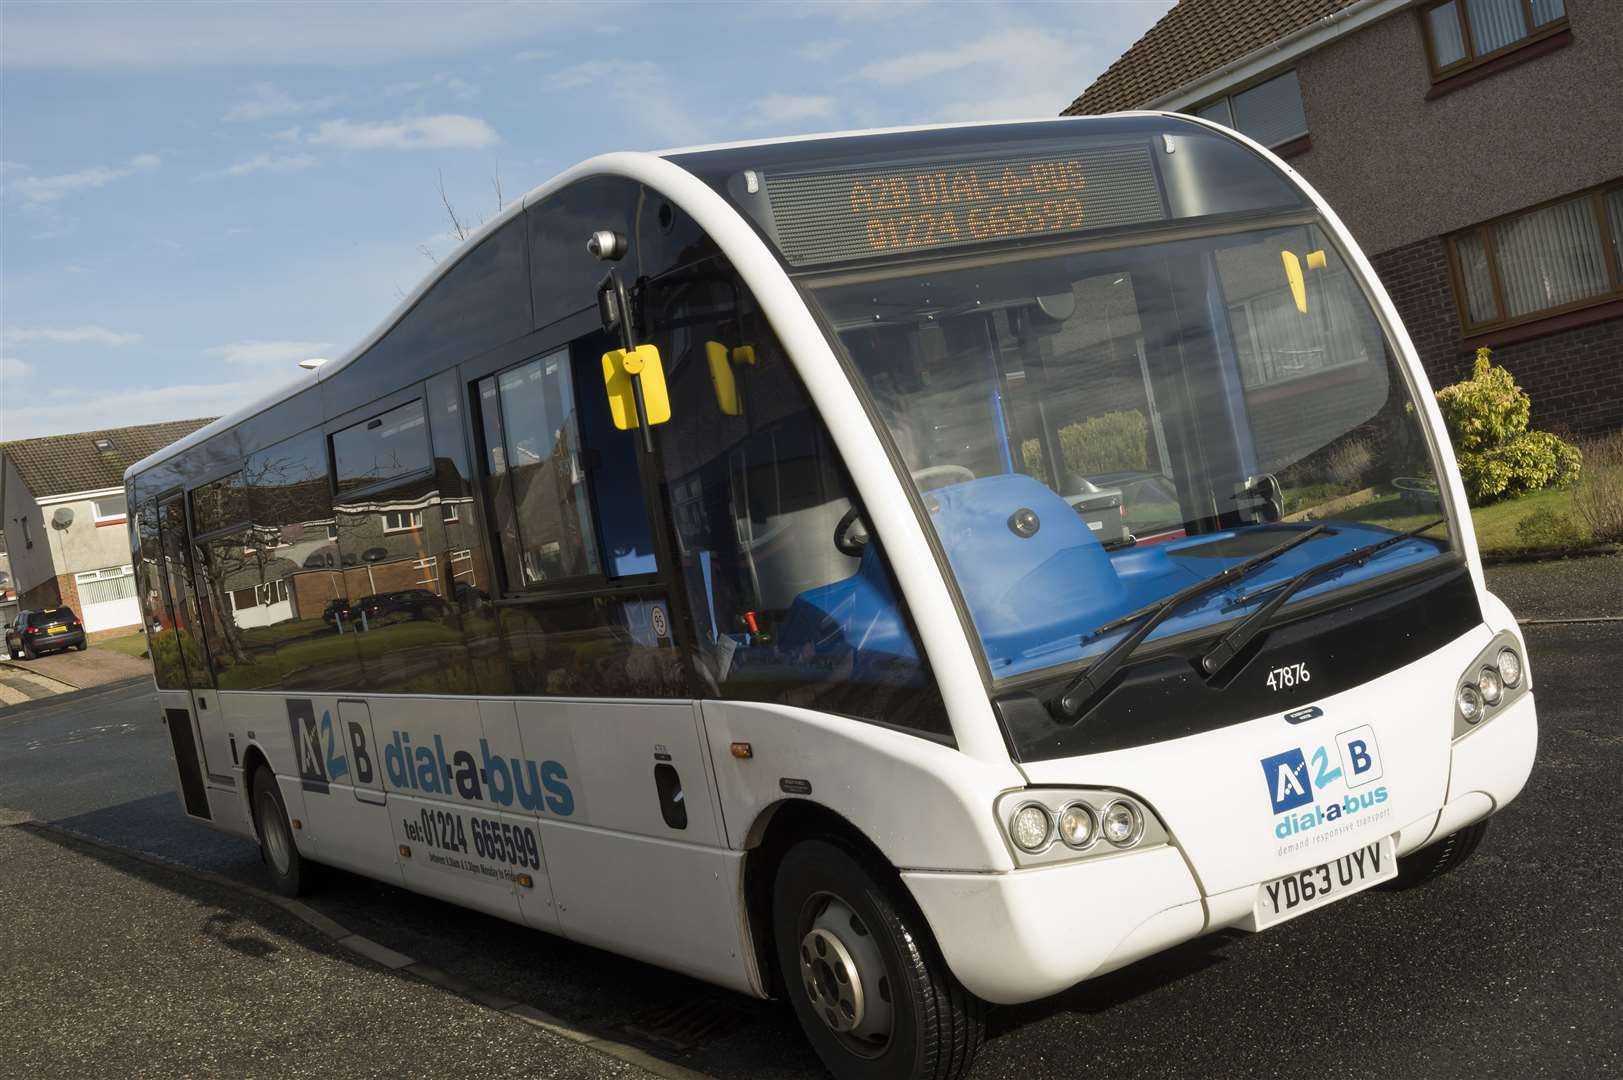 Funding has been agreed for the Dial-a-bus service